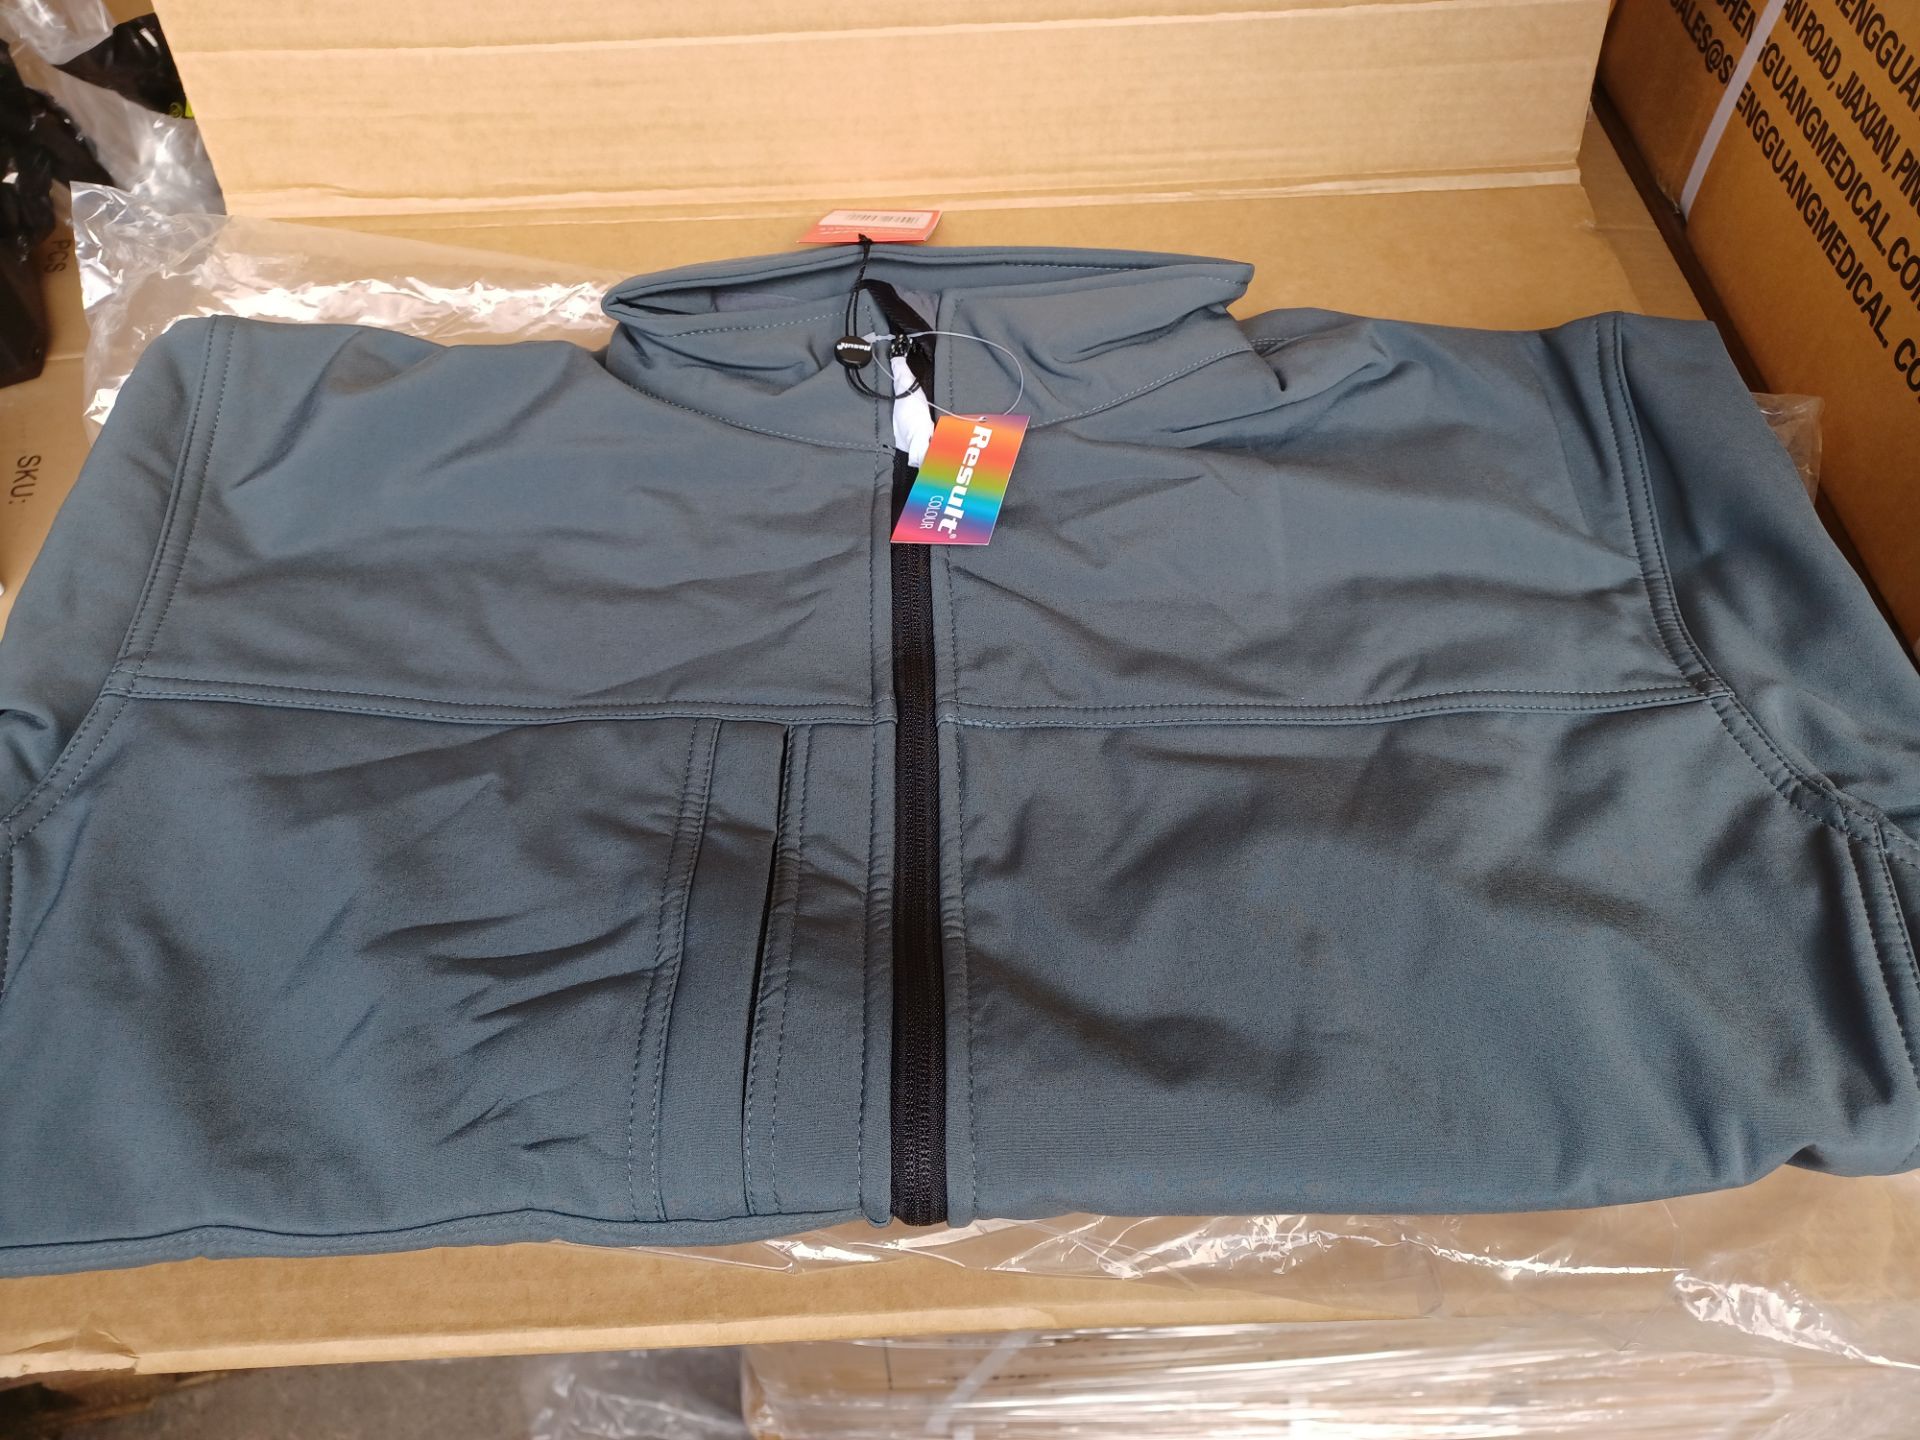 5 X NEW PACKAGED RESULT CLASSIC SOFT SHELL JACKETS SIZES LARGE/EXTRA LARGE S1-27